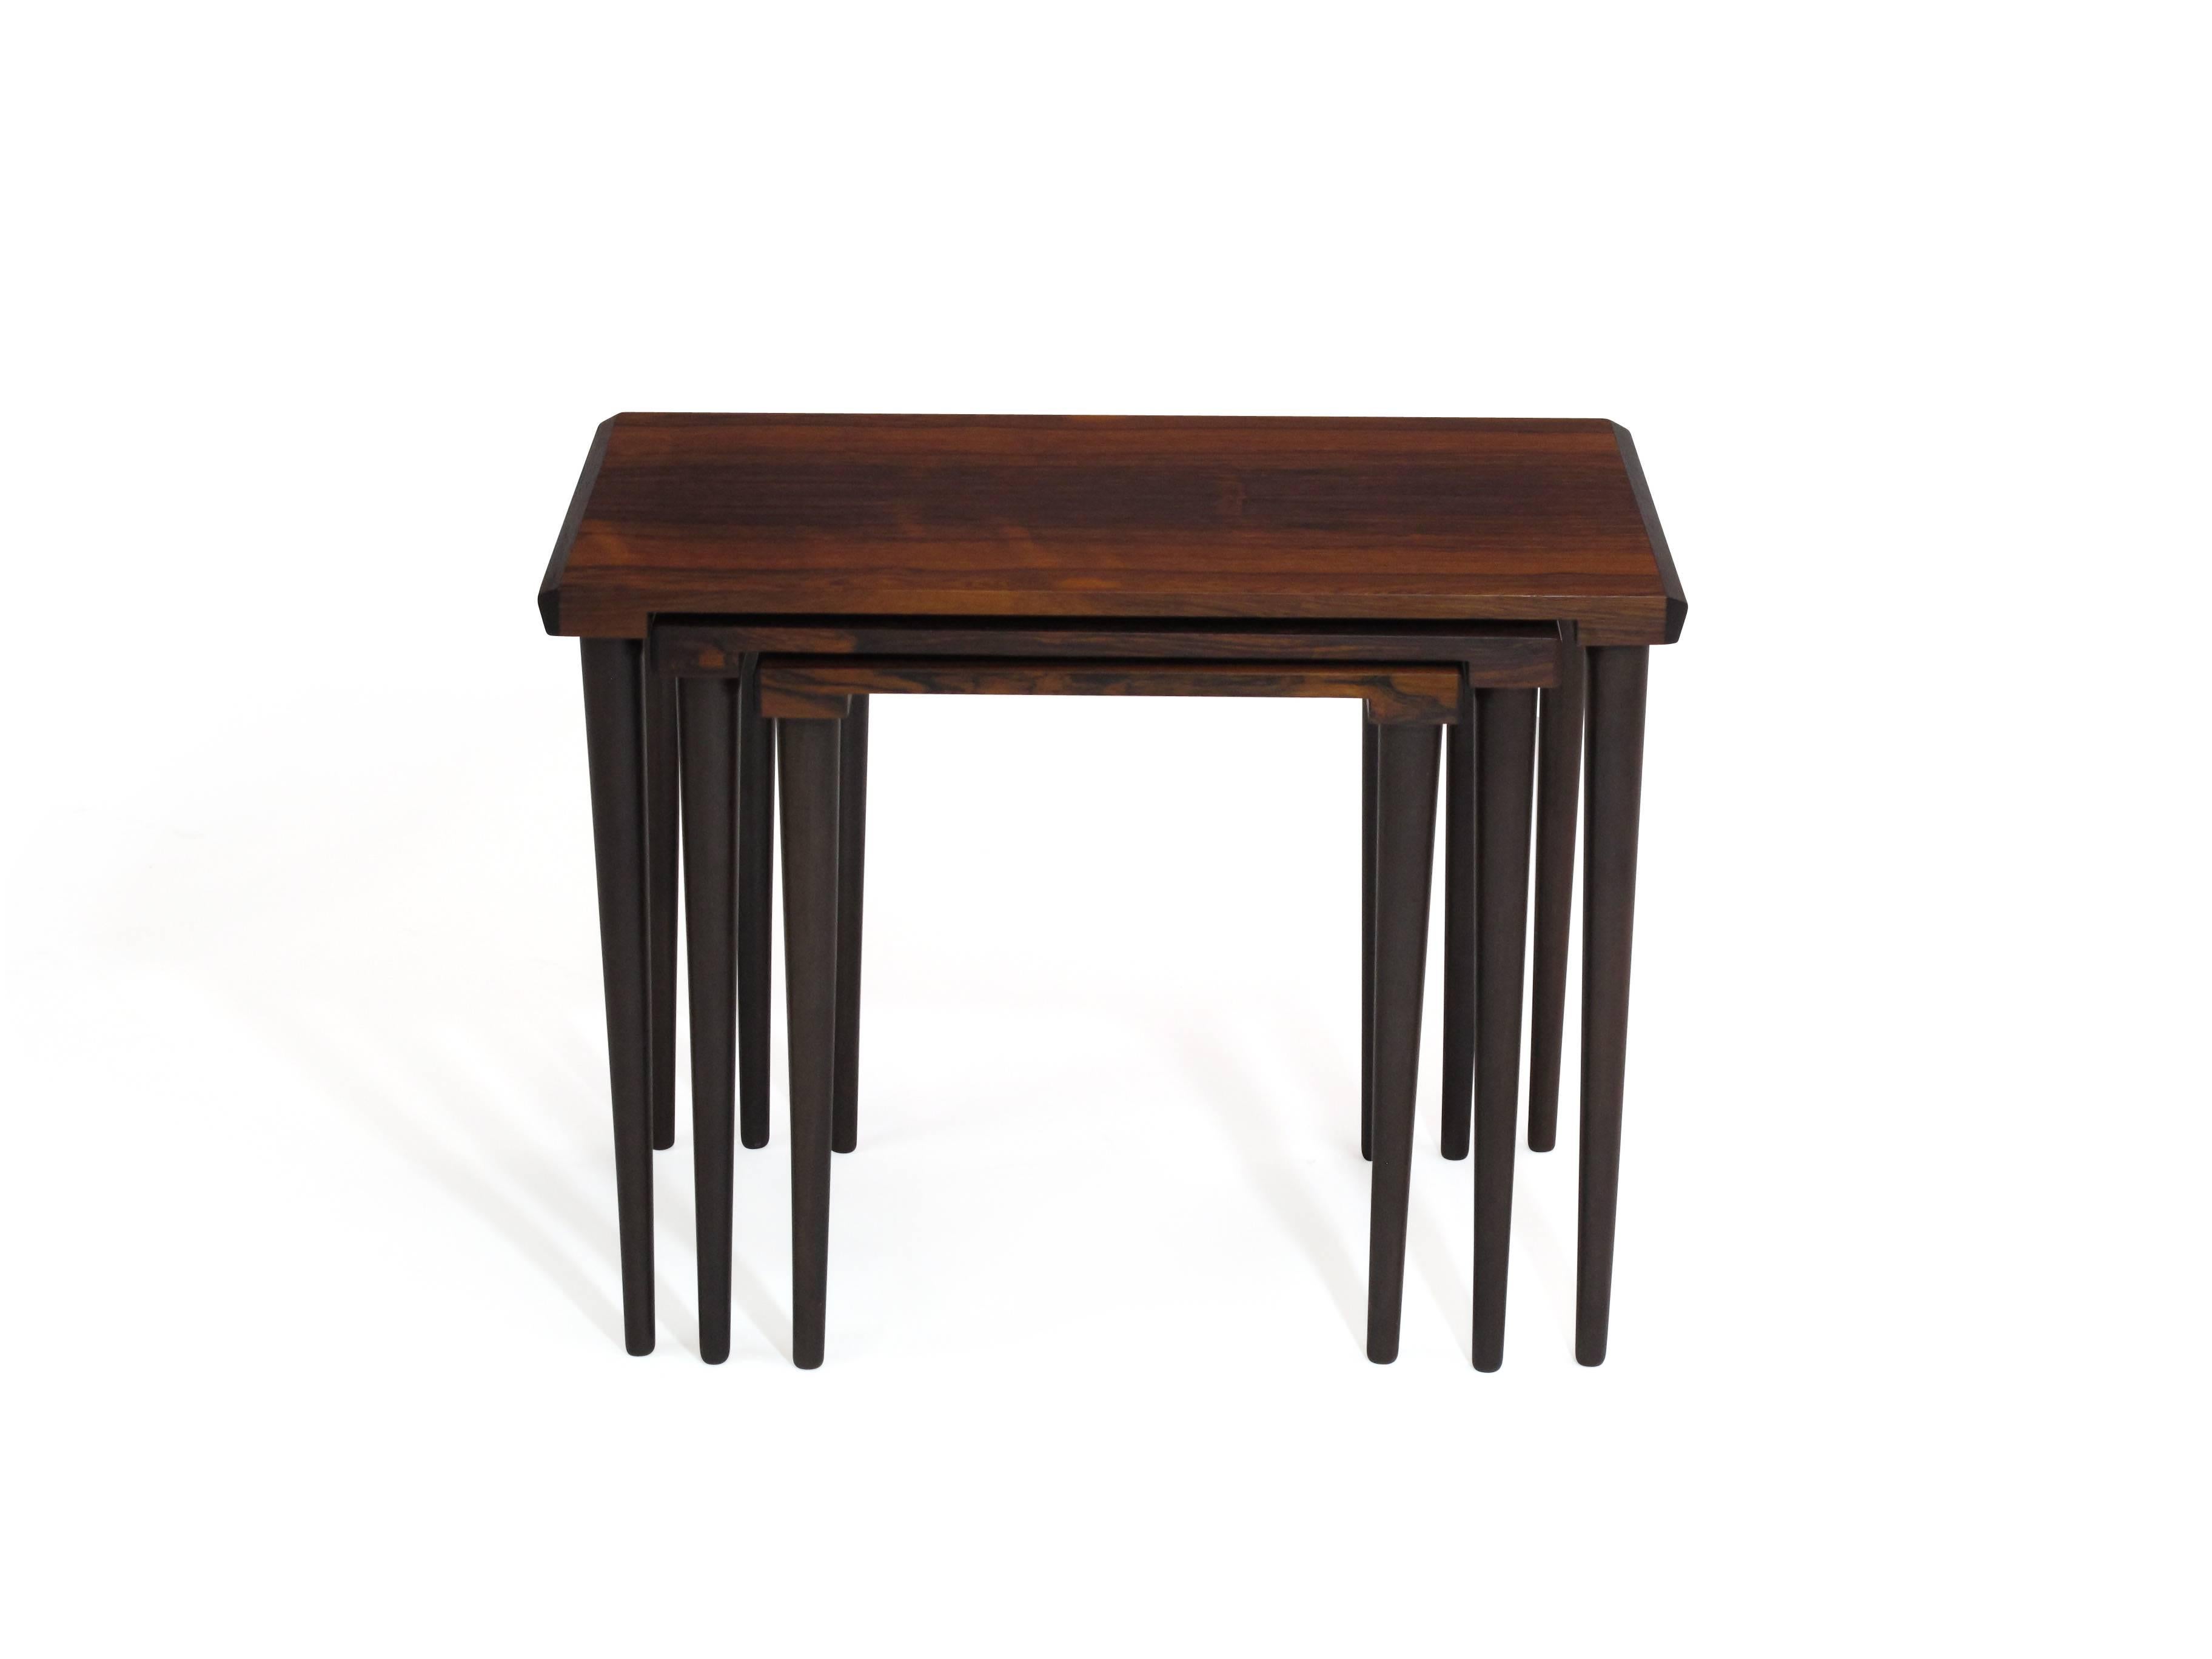 Set of three Danish nesting tables crafted of vibrant rosewood with bevelled edges, and raised on tapered legs. The set of three tables have been finely restored and are in excellent condition.